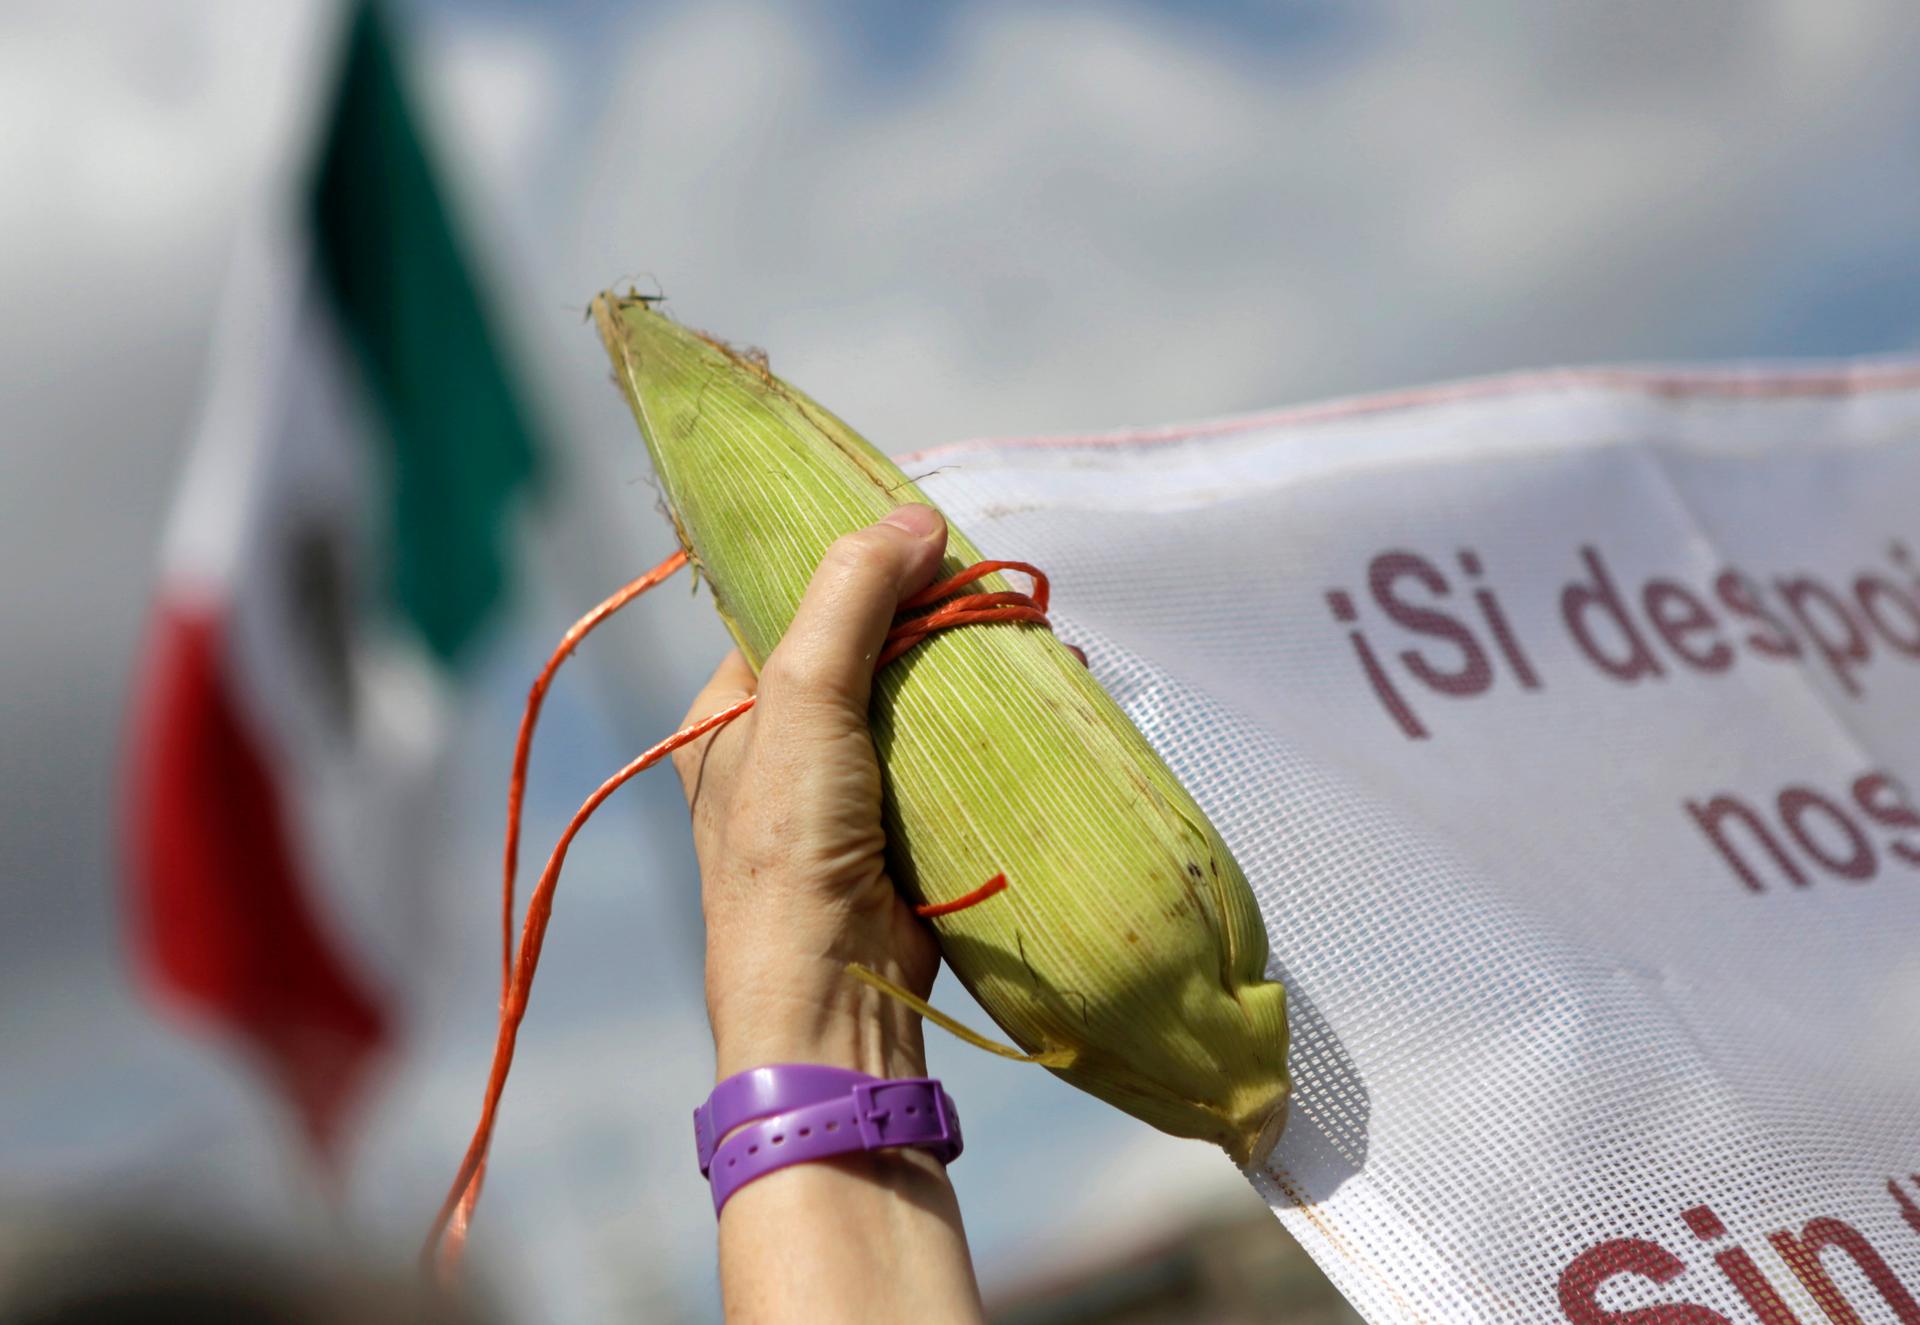 A Mexican demonstrator holds a corn cob on "Día Nacional del Maíz" (National Corn Day). Mexicans have an expression: "sin maíz, no hay país” (without corn, there is no country). Mexico has been increasingly reliant on US imports since NAFTA took effect. 